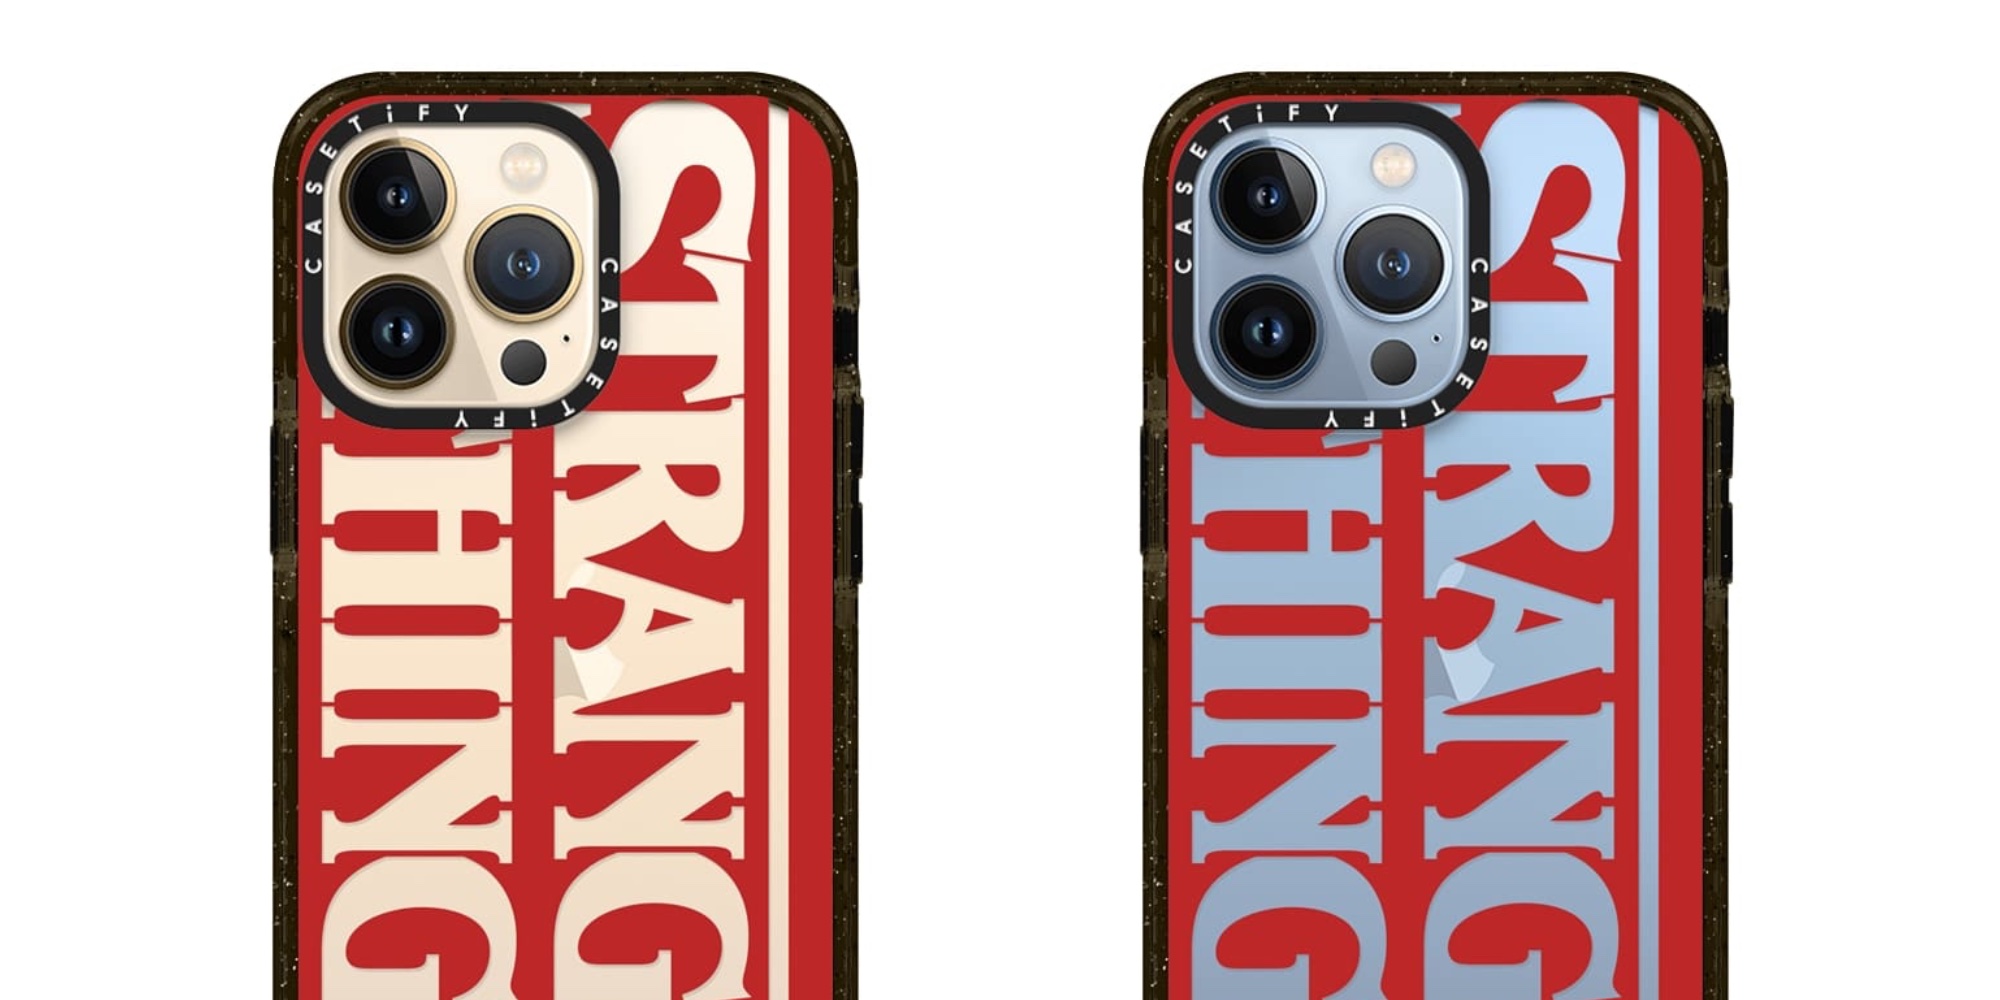 CASETiFY Stranger Things Apple accessory collection revealed 